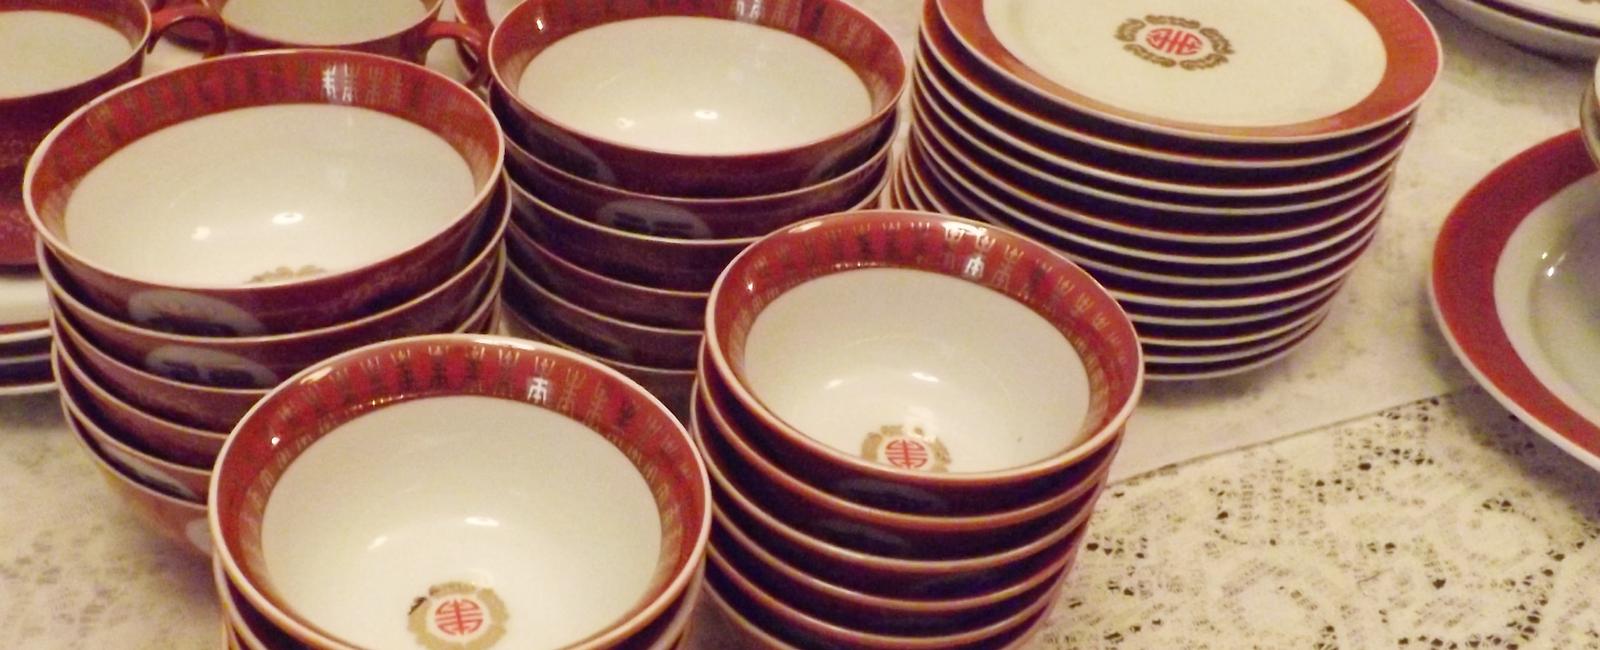 A company in taiwan makes dinnerware out of wheat so you can eat your plate